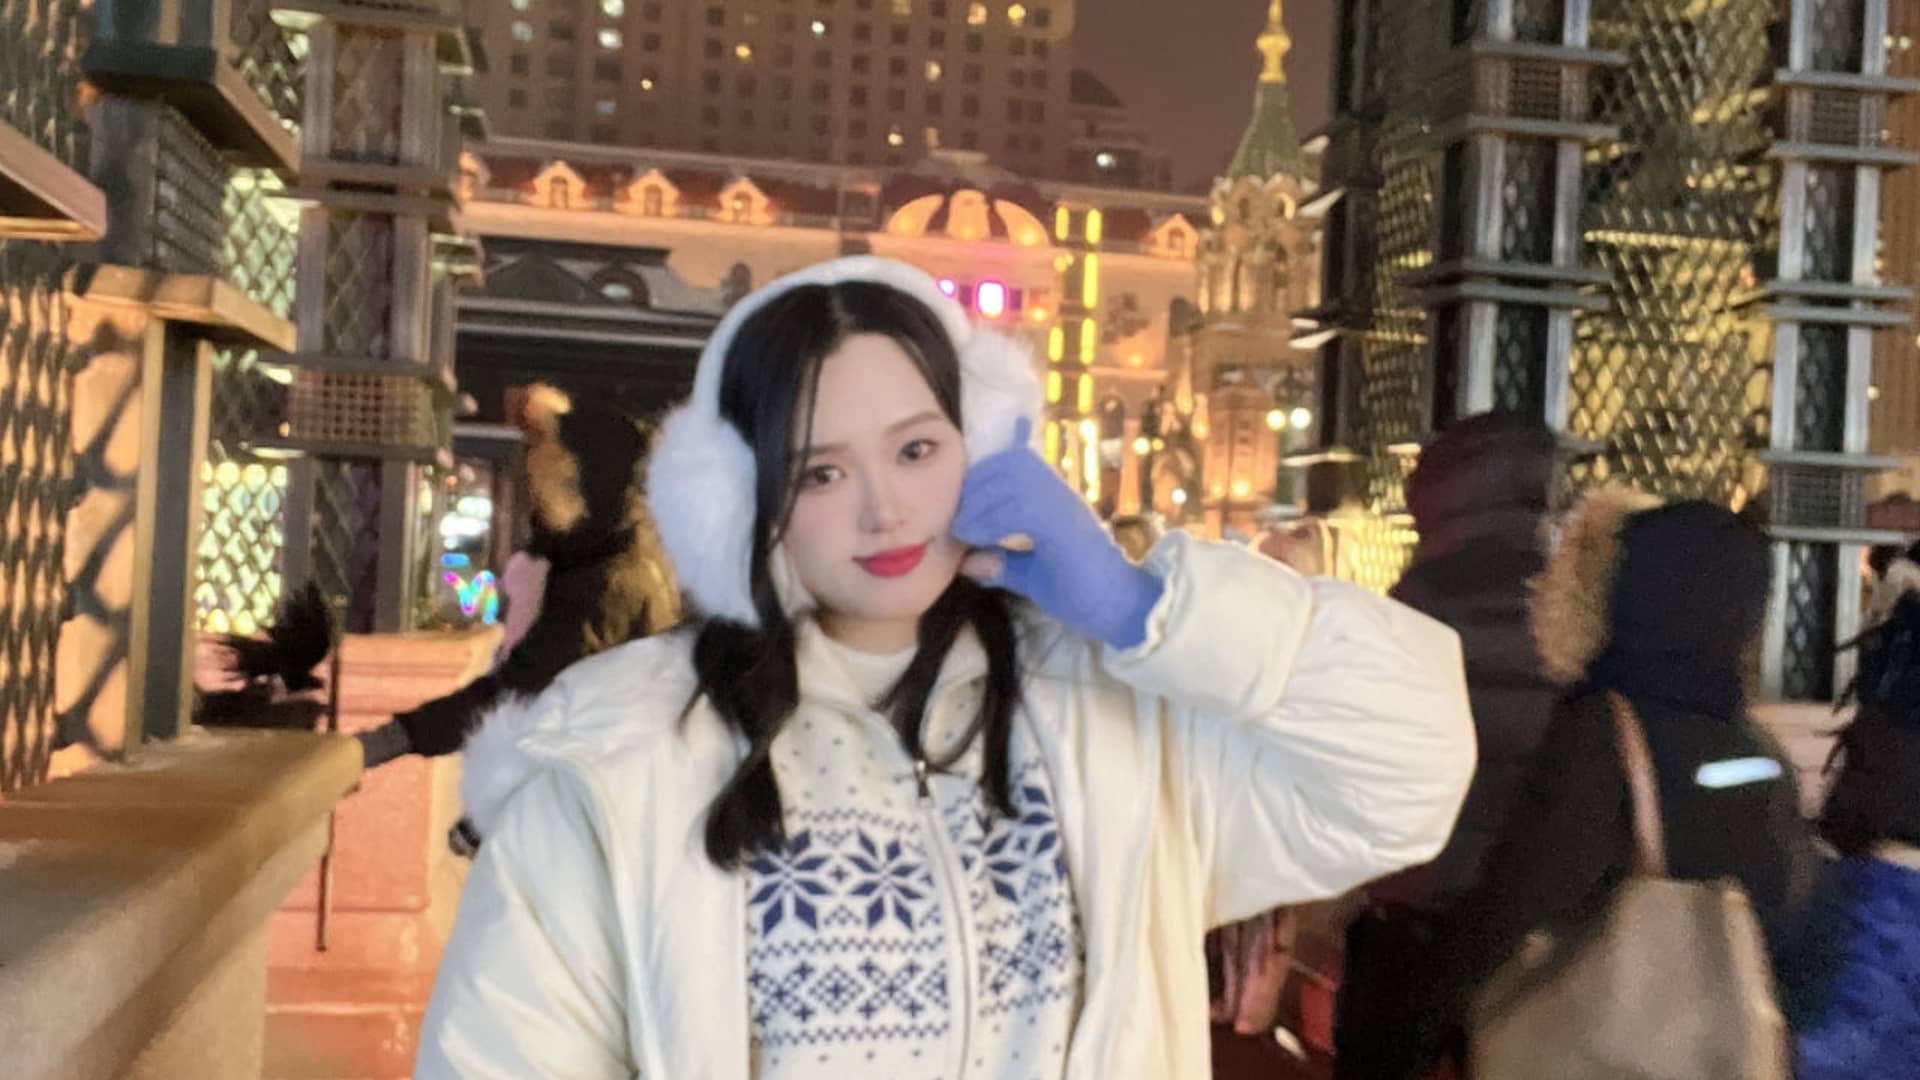 Southerners arrive decked out in winter gear to visit Harbin.